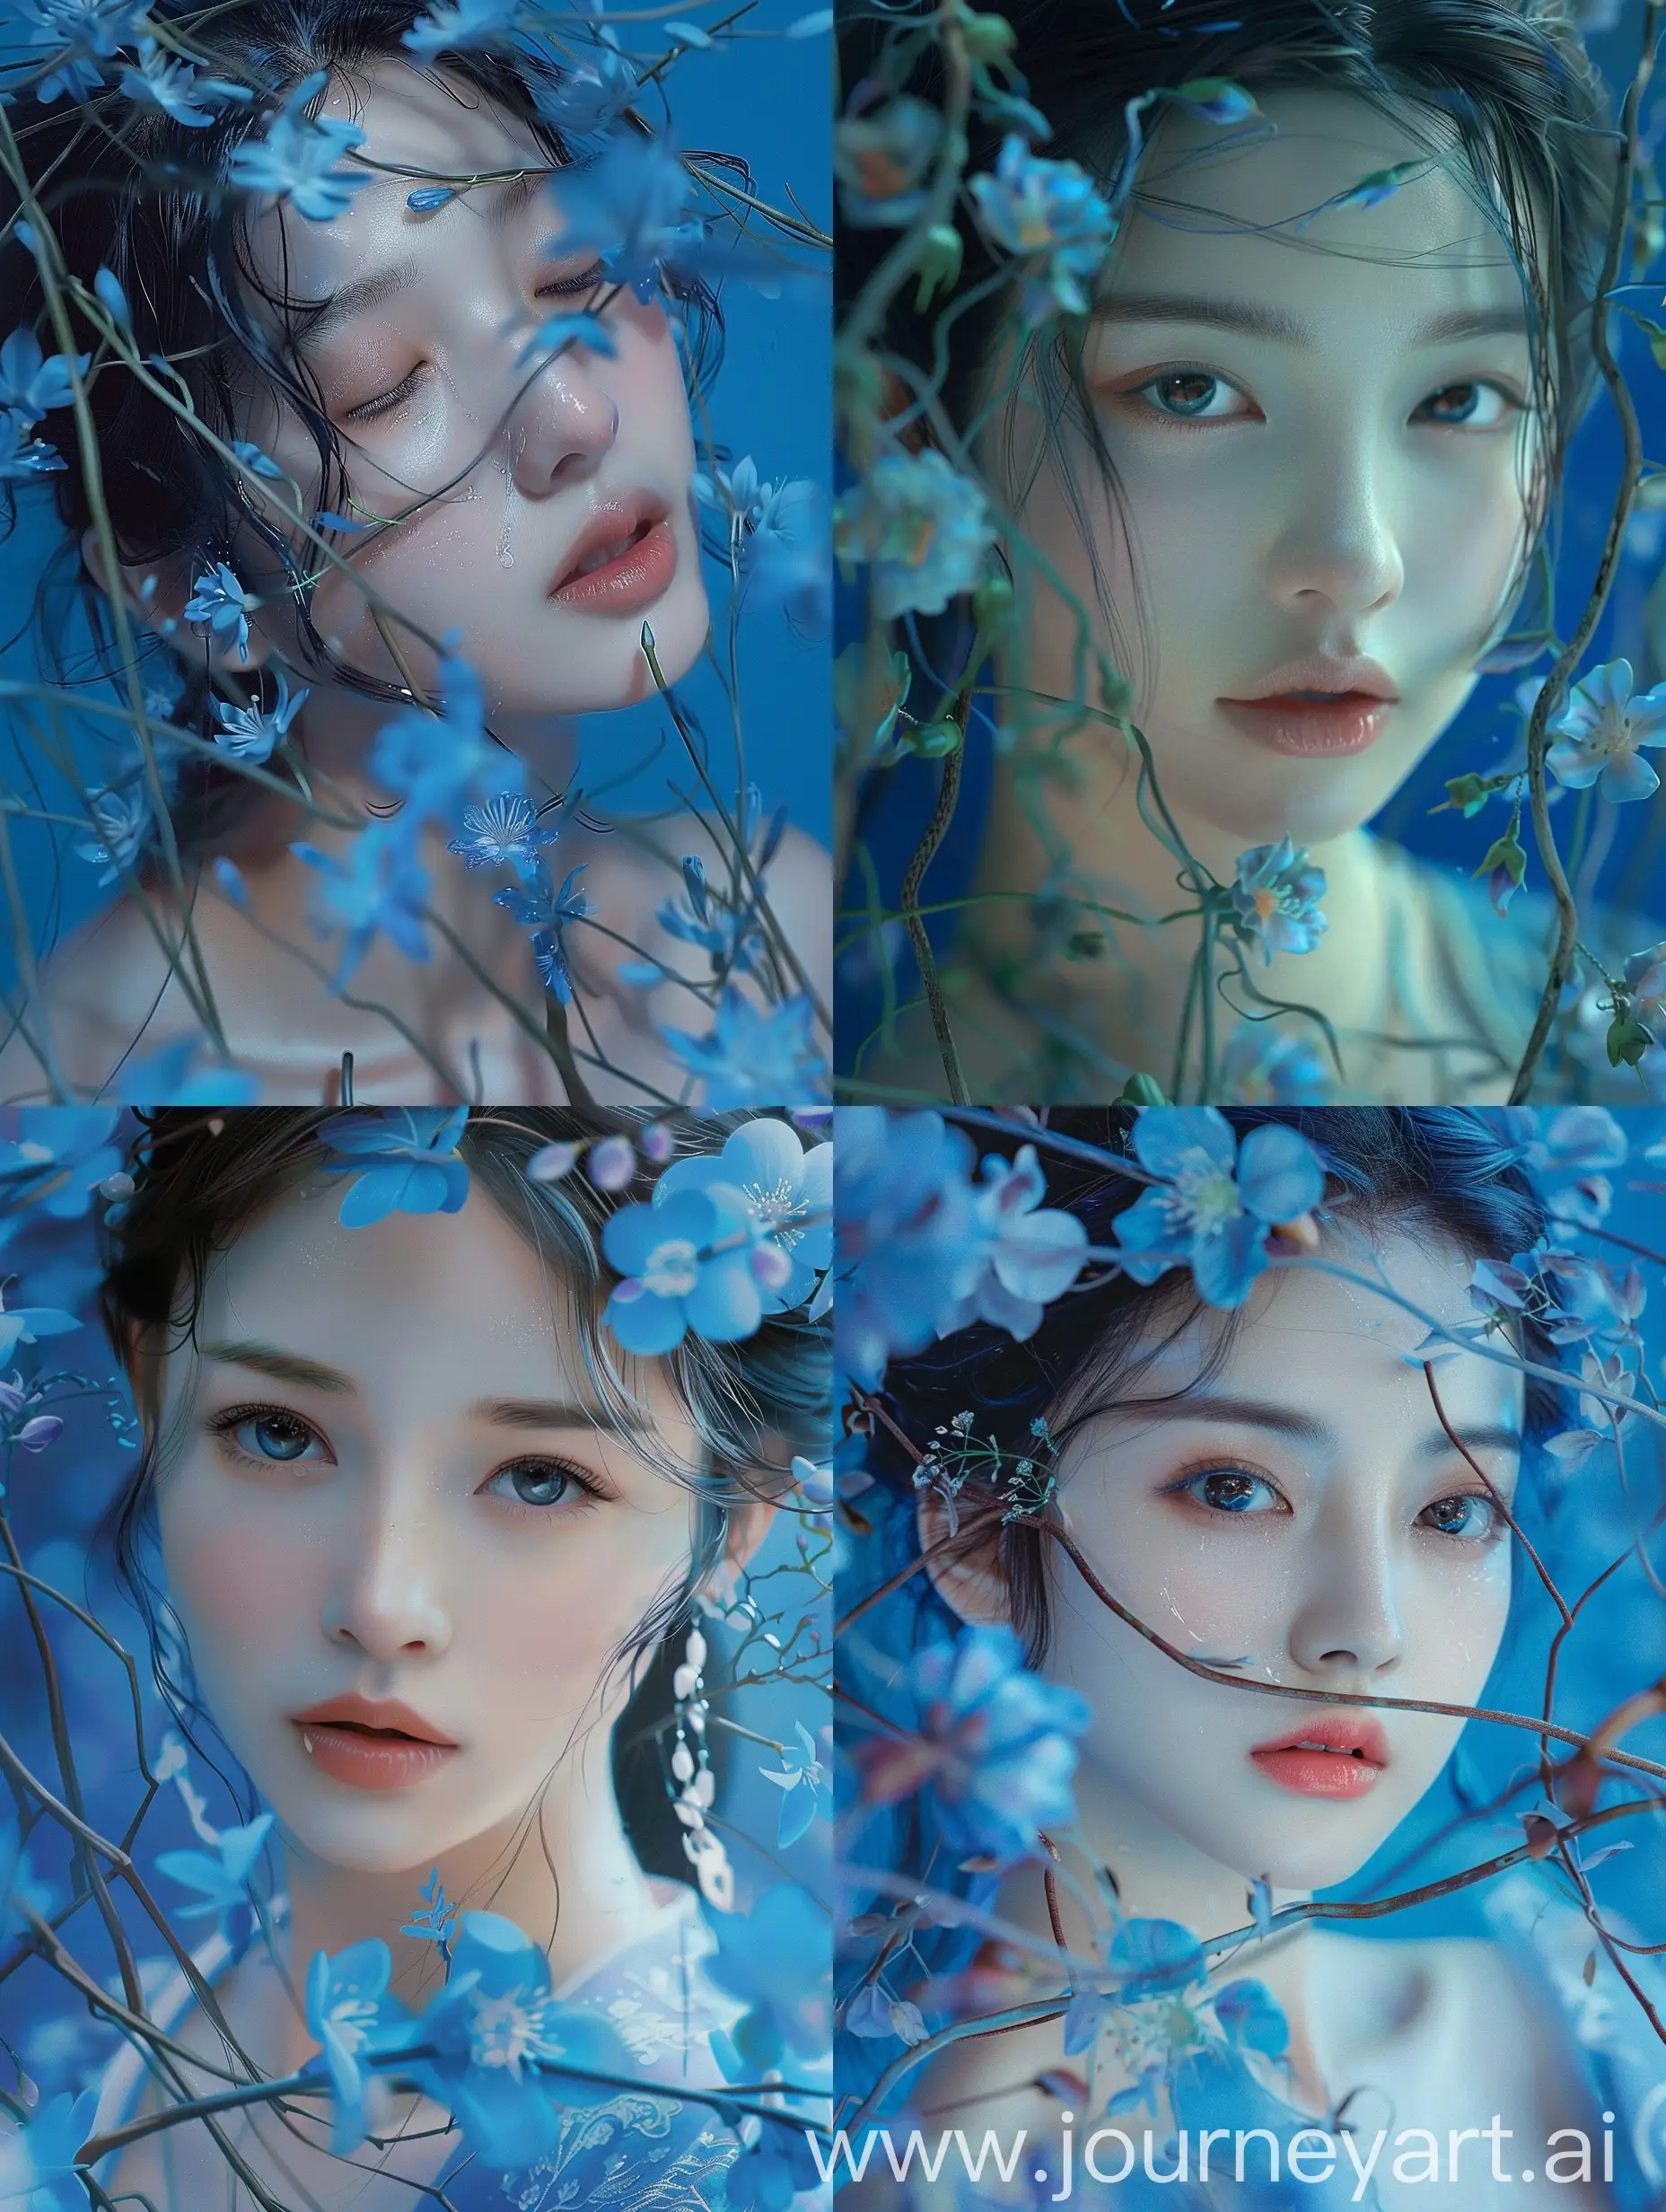 A beautiful Chinese woman, flower vines, blue color, master level, surrealism, close-up, poster